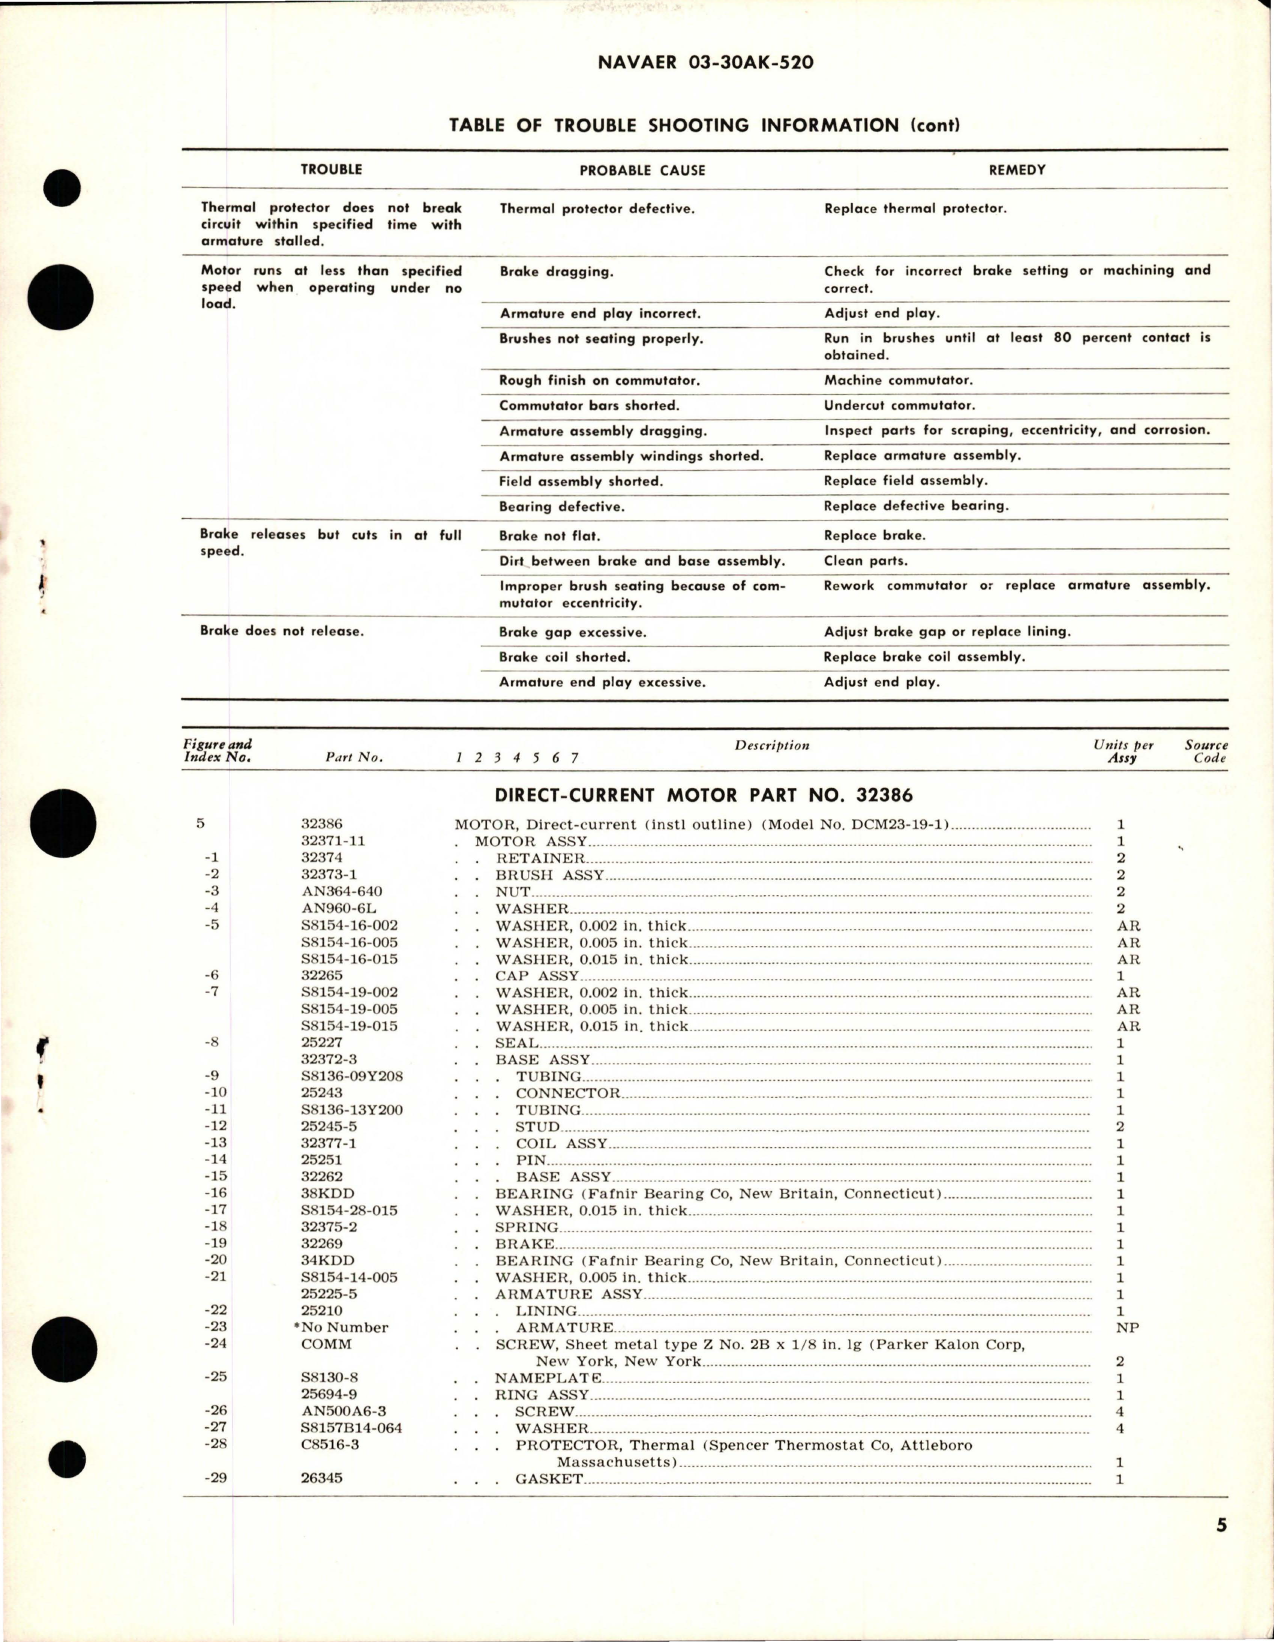 Sample page 5 from AirCorps Library document: Overhaul Instructions with Parts Breakdown for Direct-Current Motor - Part 32386 - Model DCM23-19